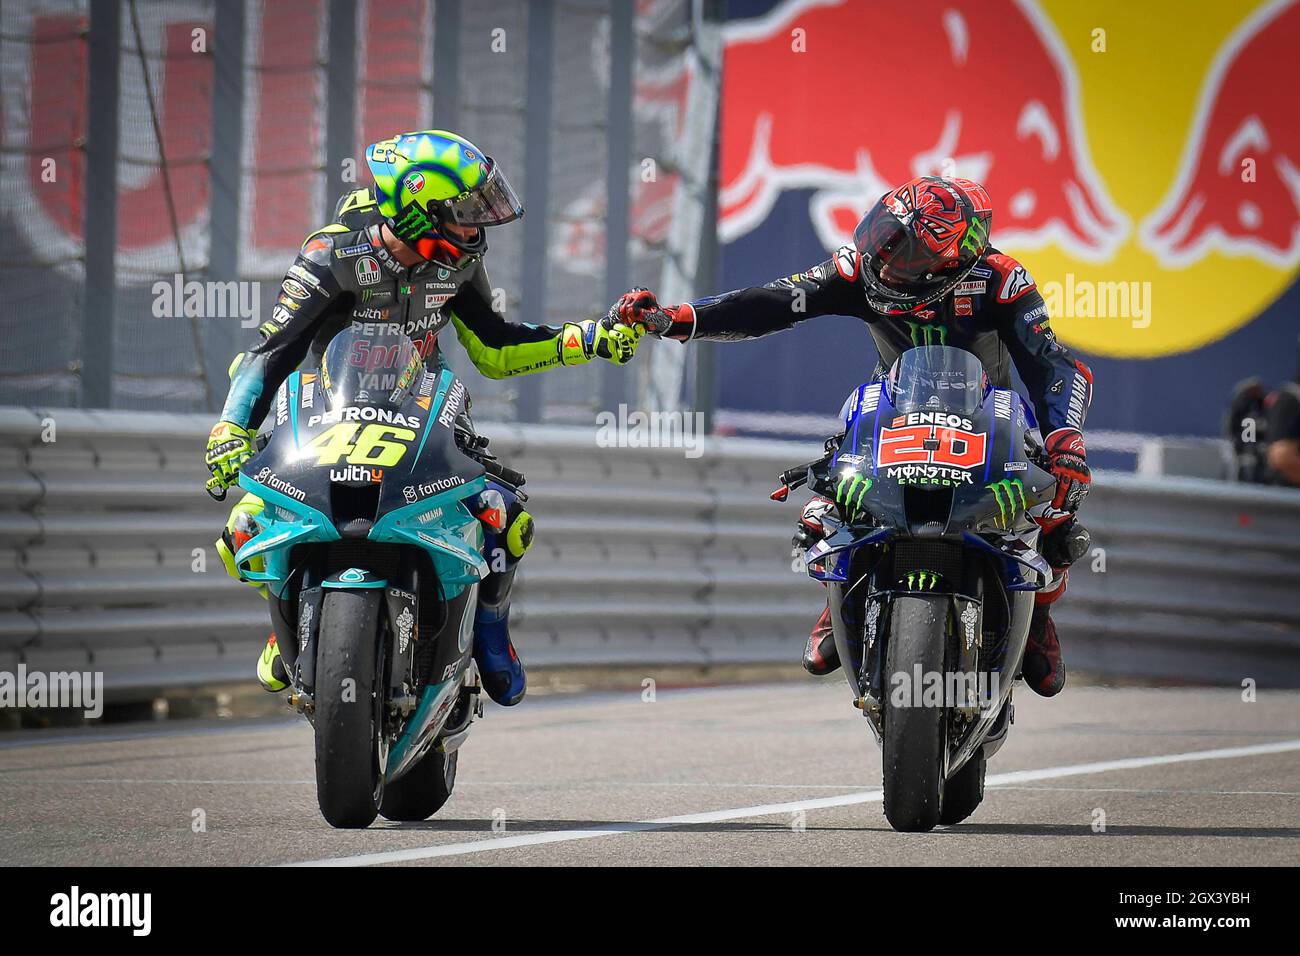 Austin, USA. 03rd Oct, 2021. Races at MotoGP Red Bull Grand Prix of the  Americas at Circuit of the Americas Blvd, Austin, Texas, October 3, 2021 In  picture: France Fabio Quartararo and